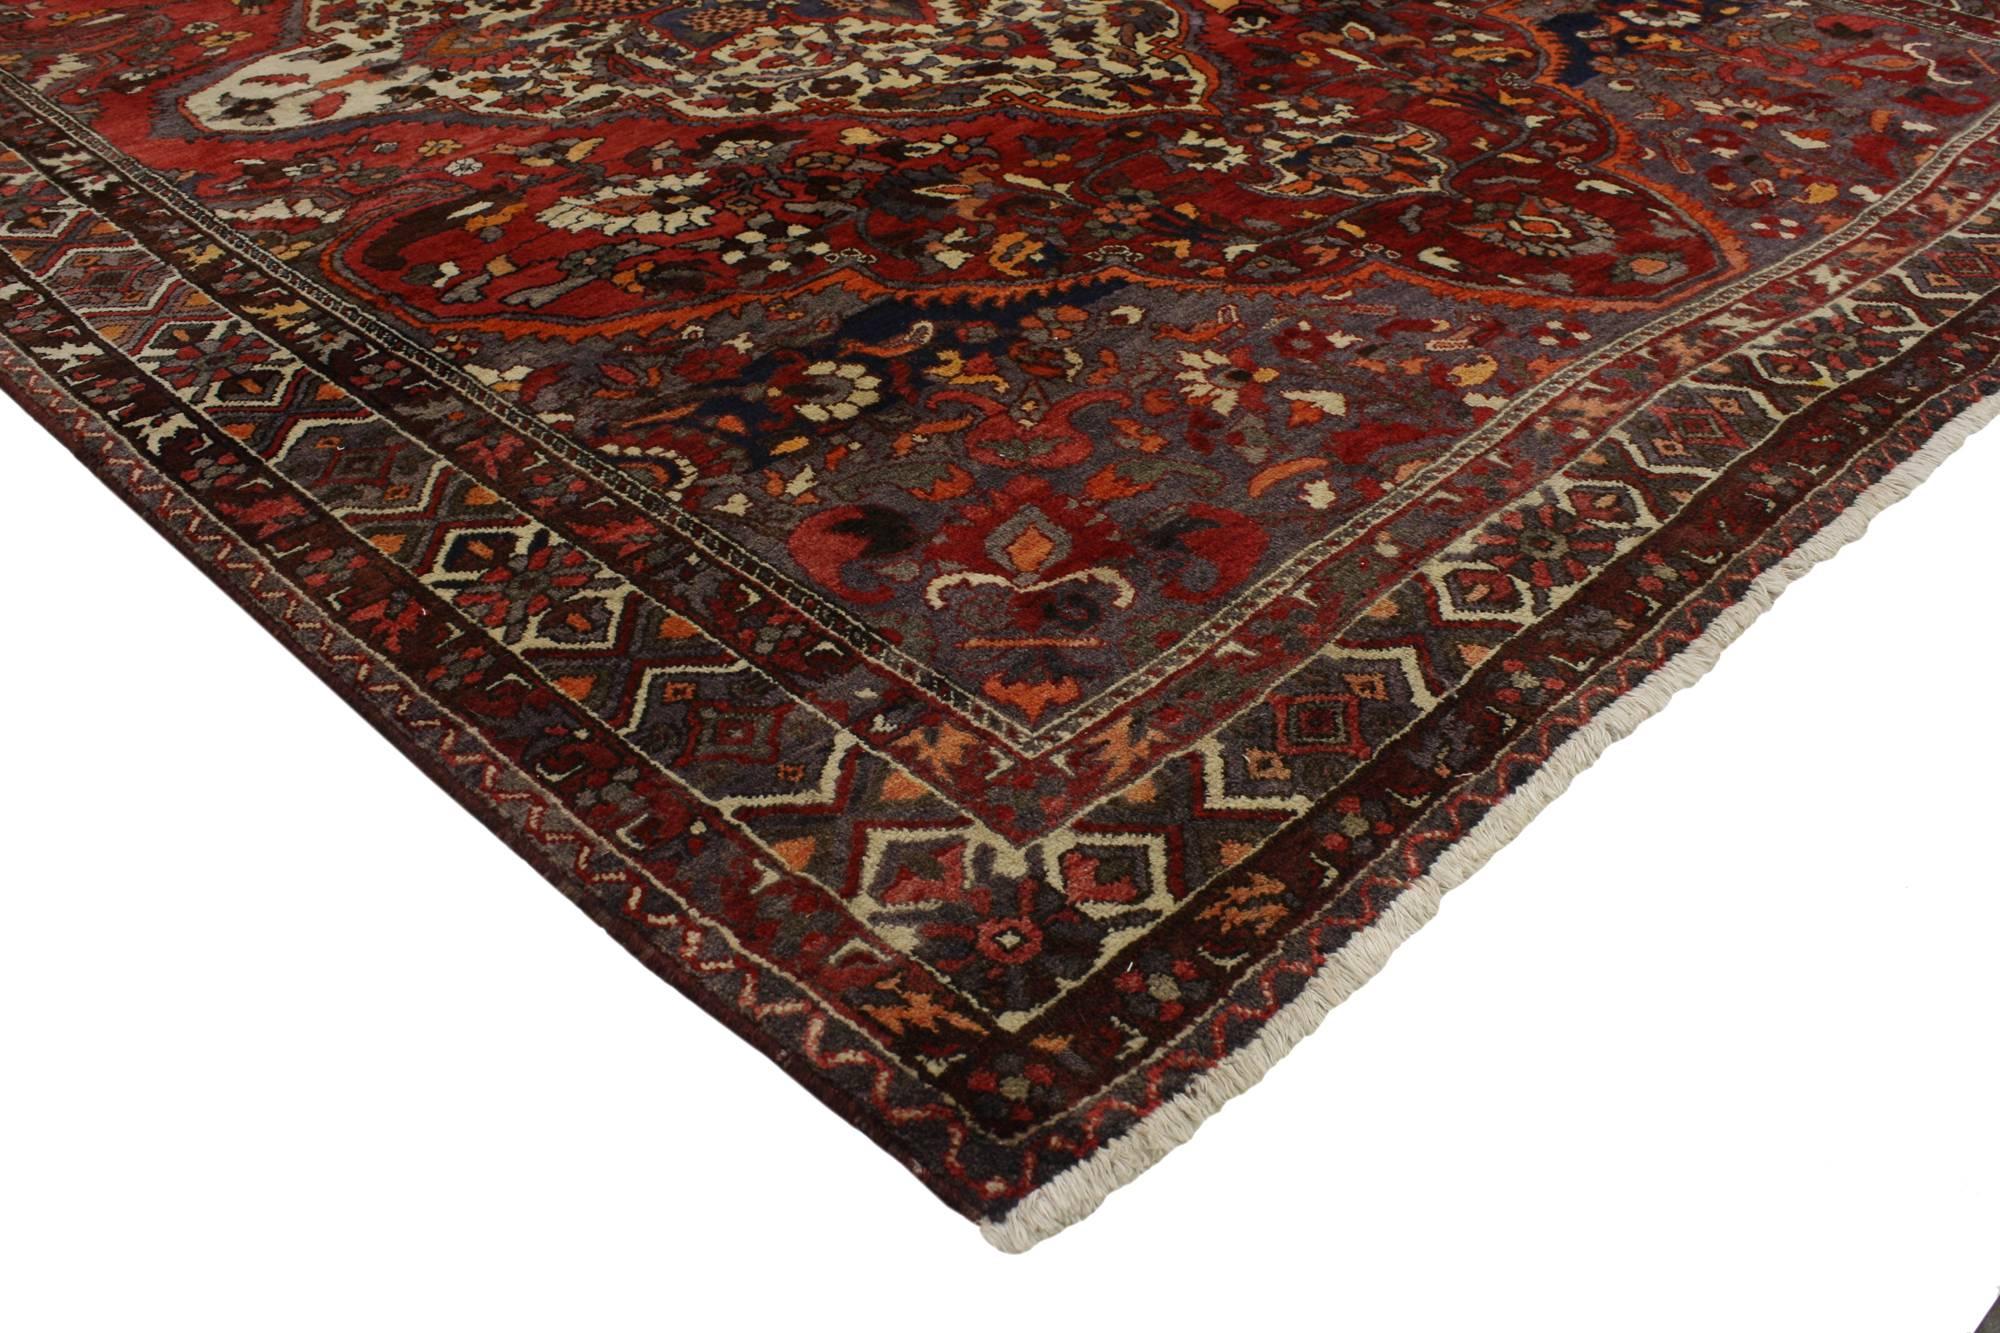 76892 Vintage Persian Bakhtiari Rug with Traditional Style. Rustic and refined with understated elegance, this hand-knotted vintage Persian Bakhtiari rug with traditional style features an octofoil medallion surrounded by lush palmettes, vines and